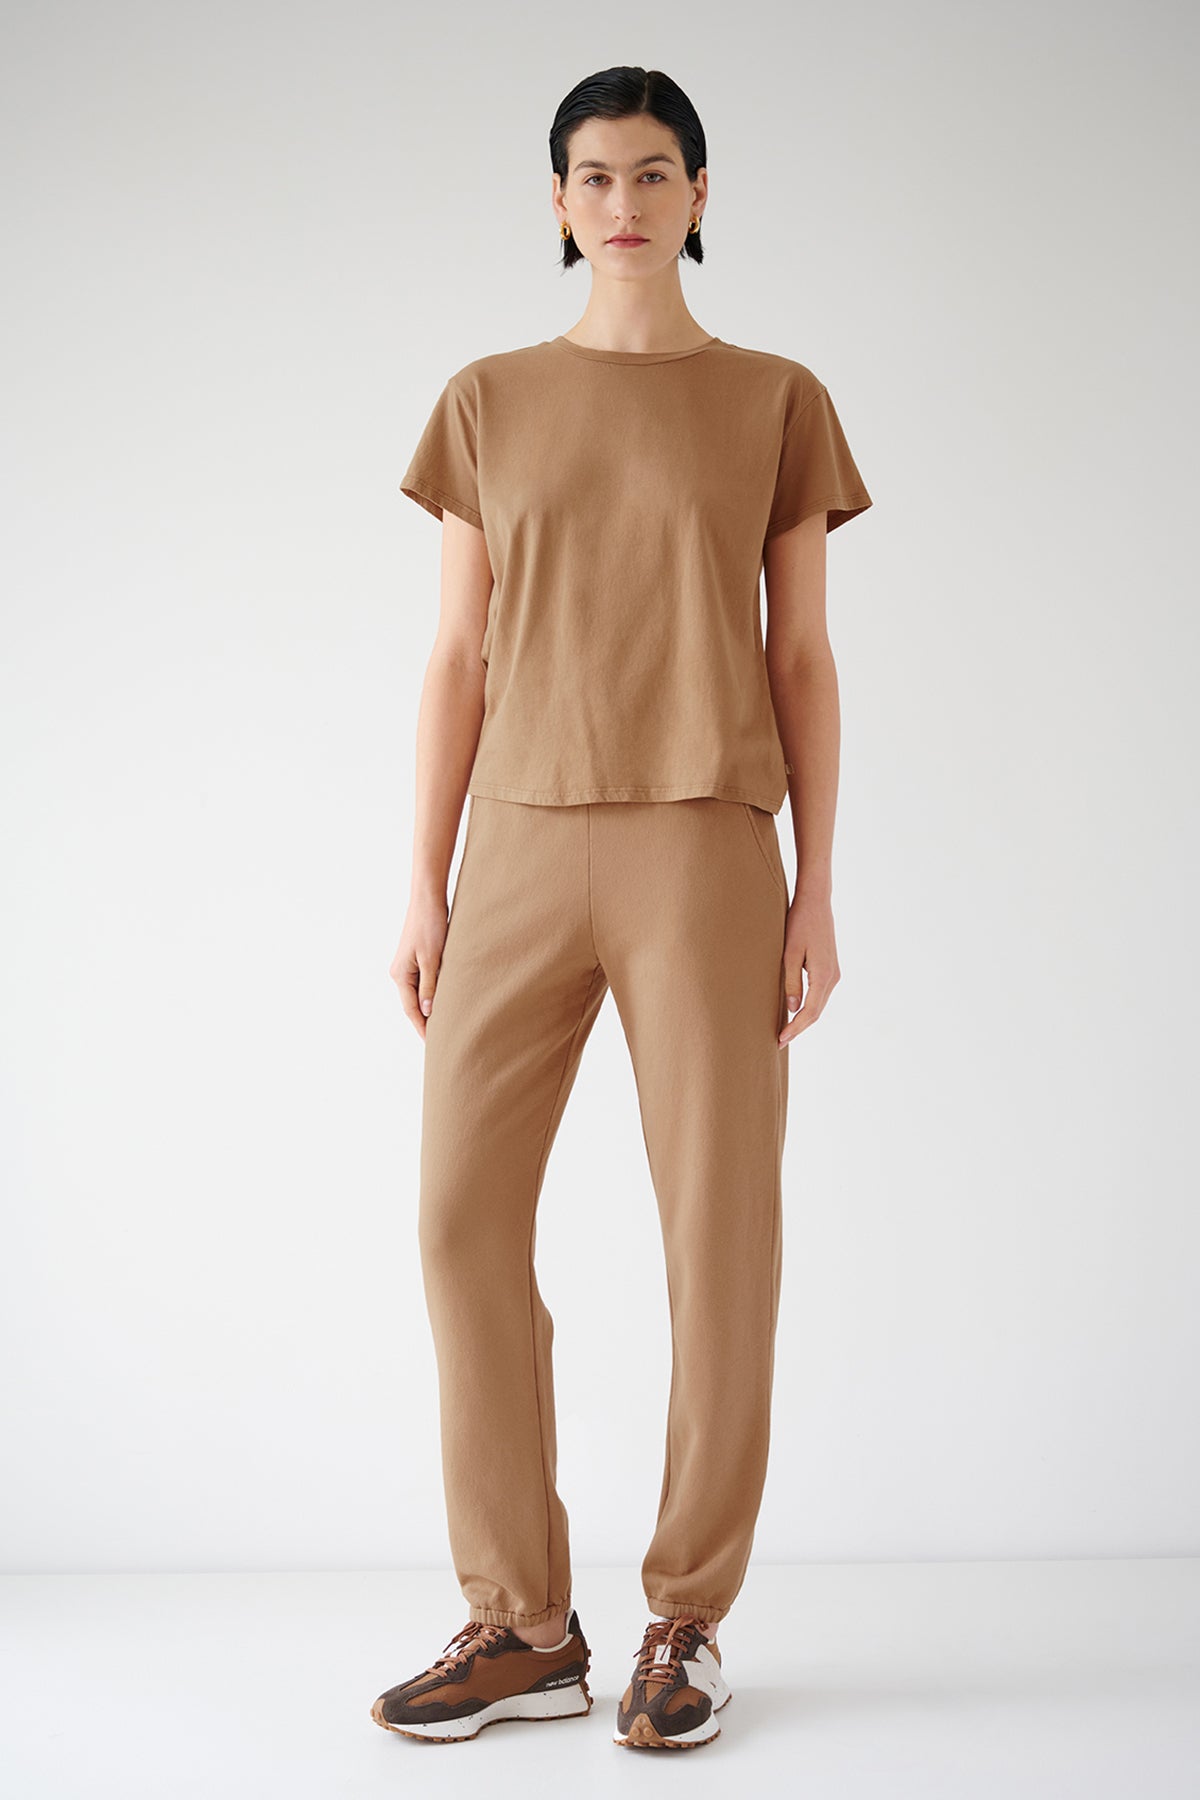   The model is wearing a tan t-shirt and Velvet by Jenny Graham ZUMA SWEATPANT. 